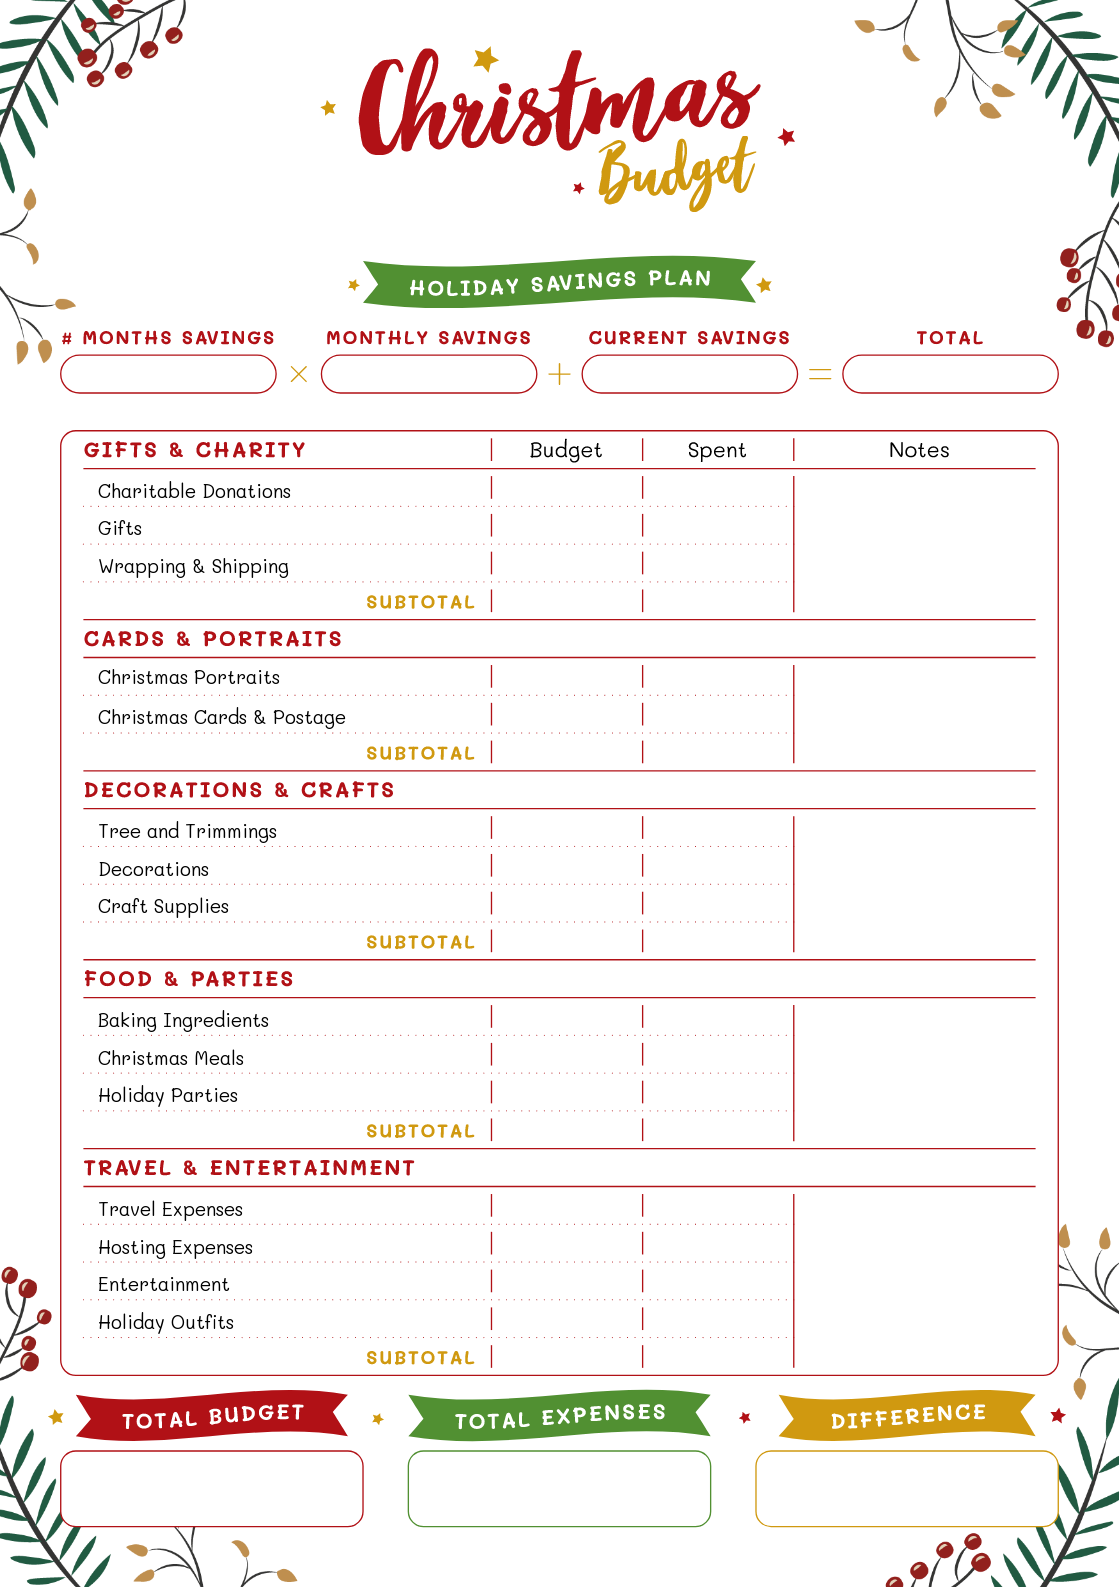 holiday-party-planner-free-printable-free-checklist-to-prepare-for